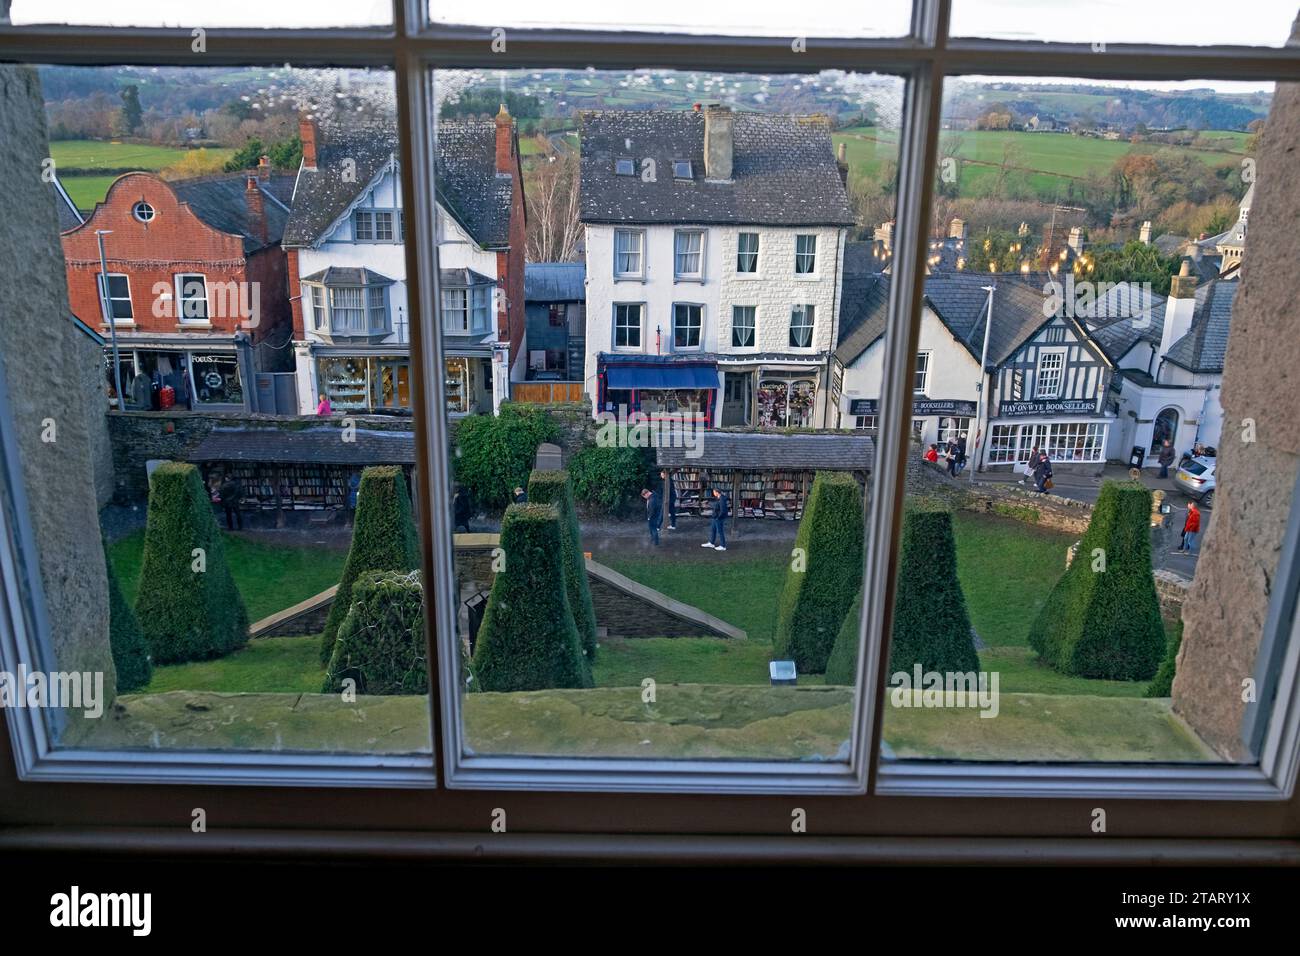 View of the book town town shops and street outside from inside Hay Castle looking through window Hay-on-Wye Wales UK Great Britain   KATHY DEWITT Stock Photo